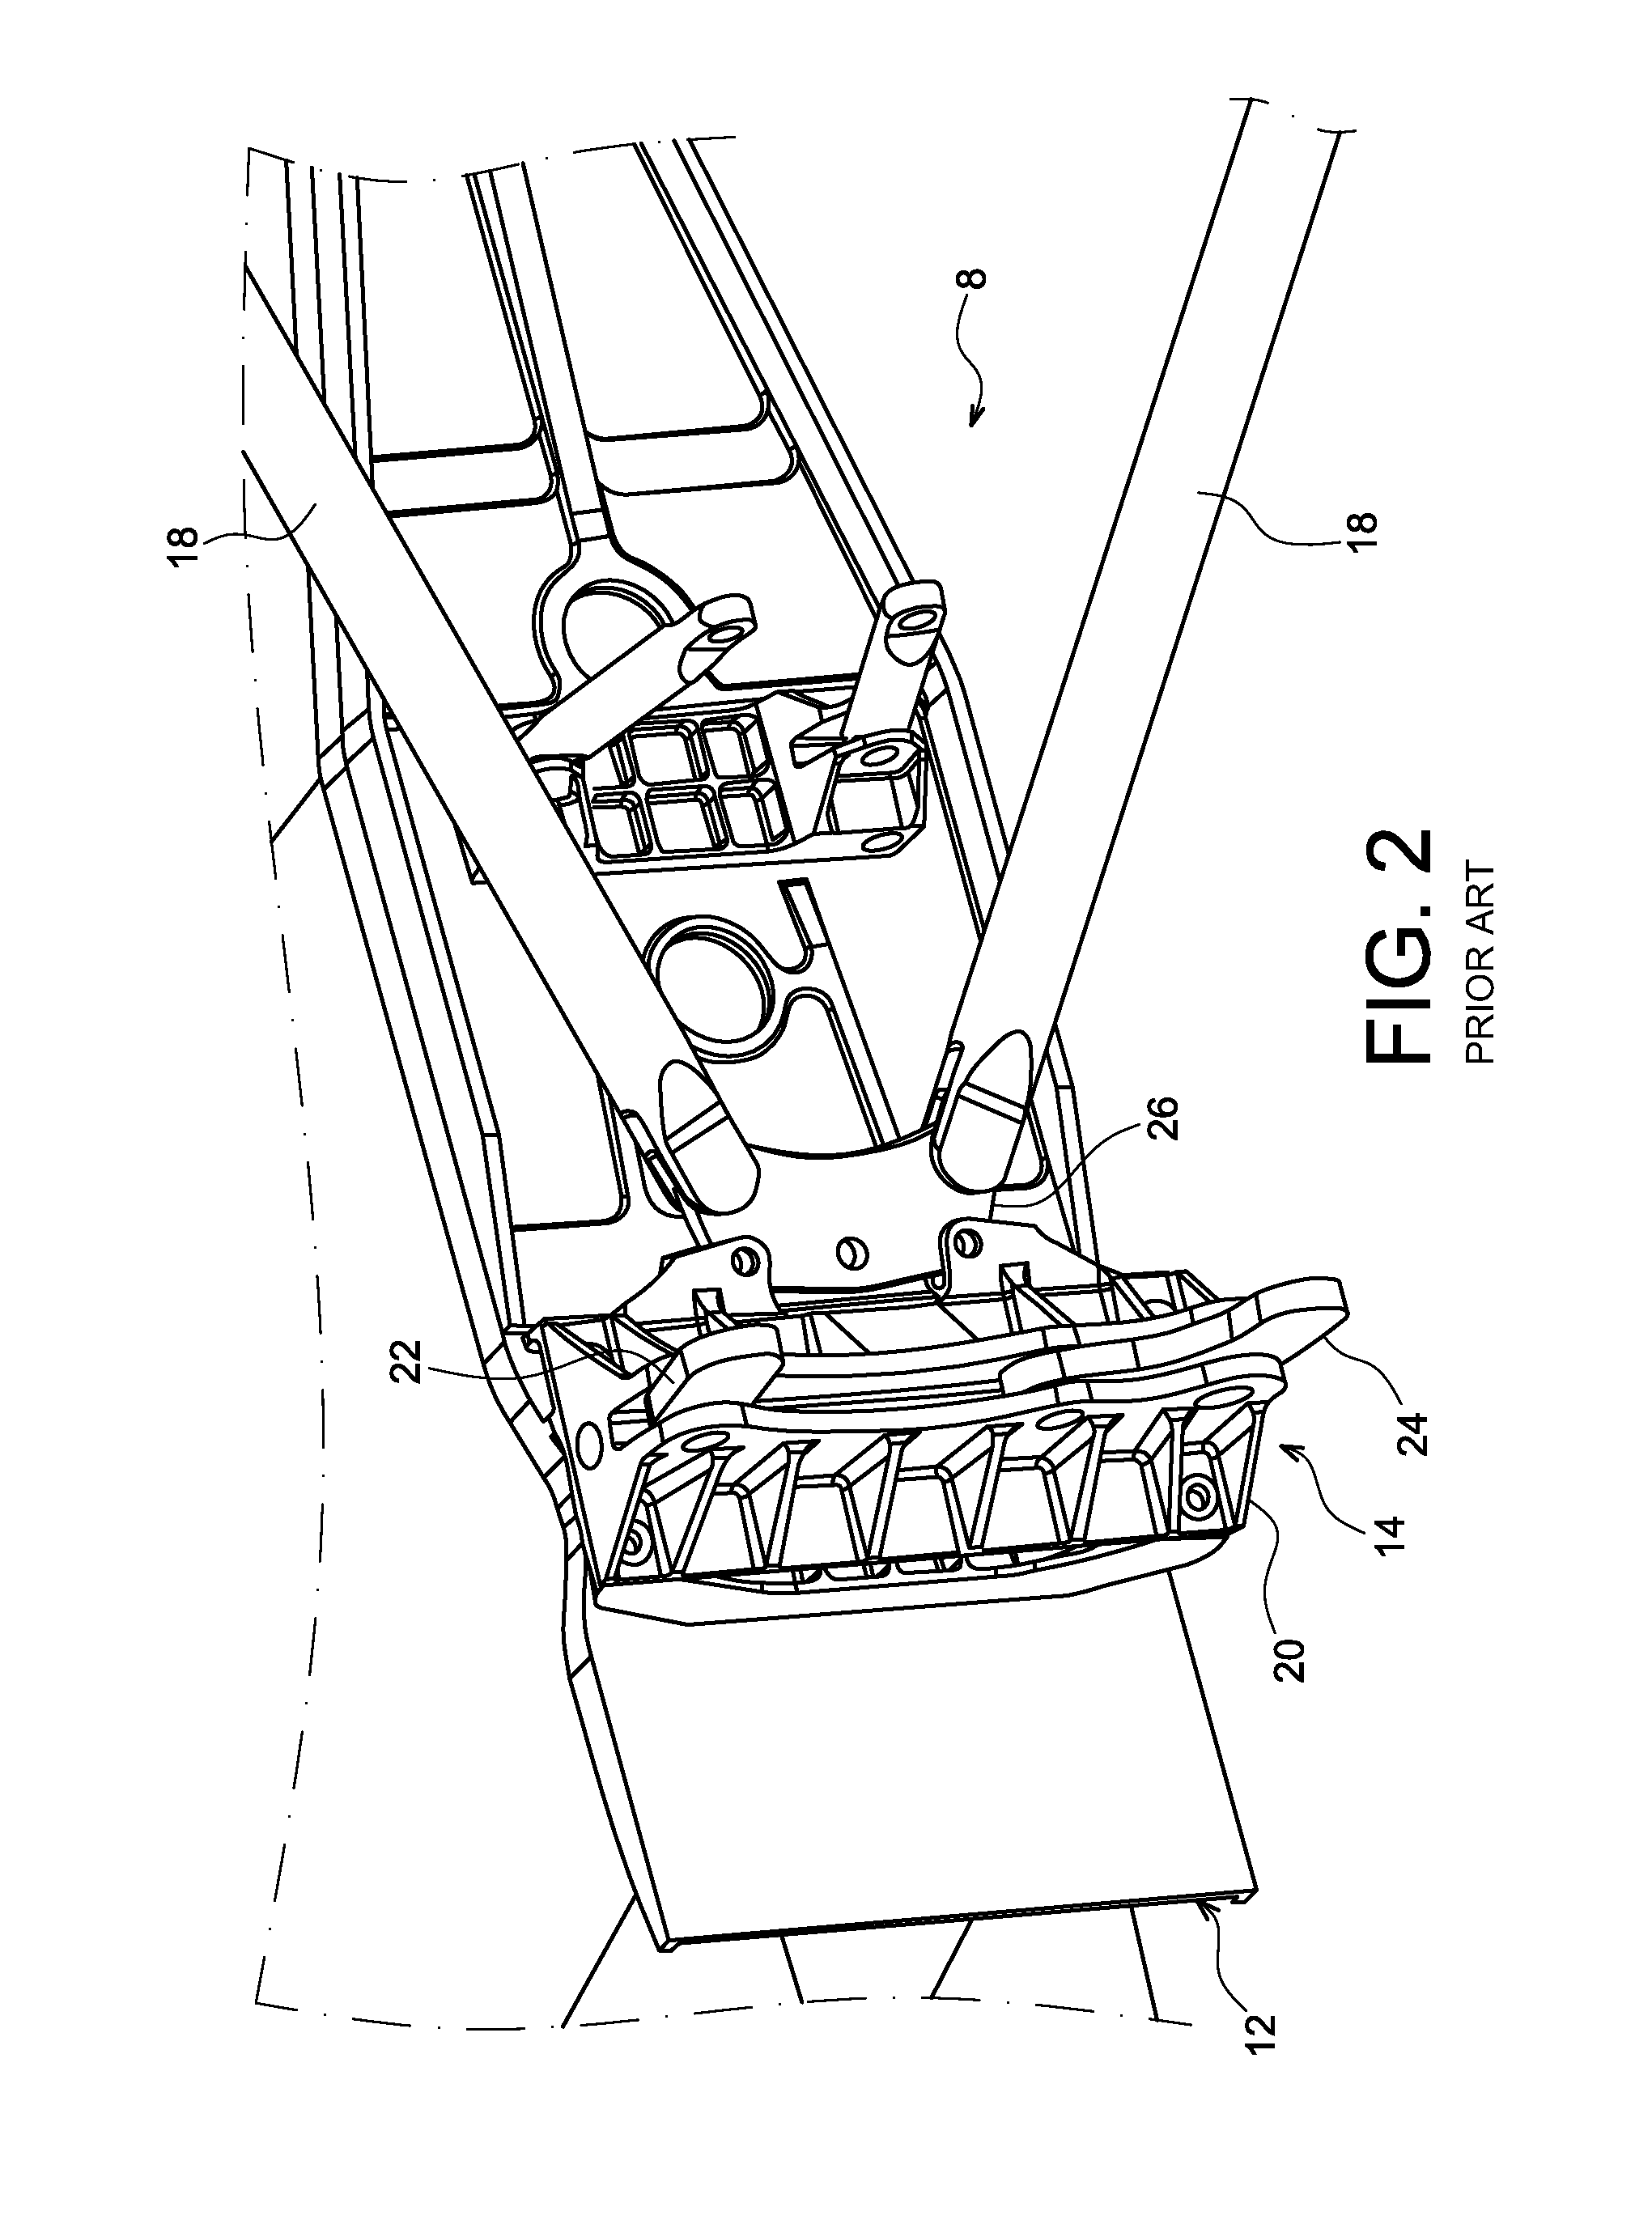 Flexible linking device for an aircraft propulsion system